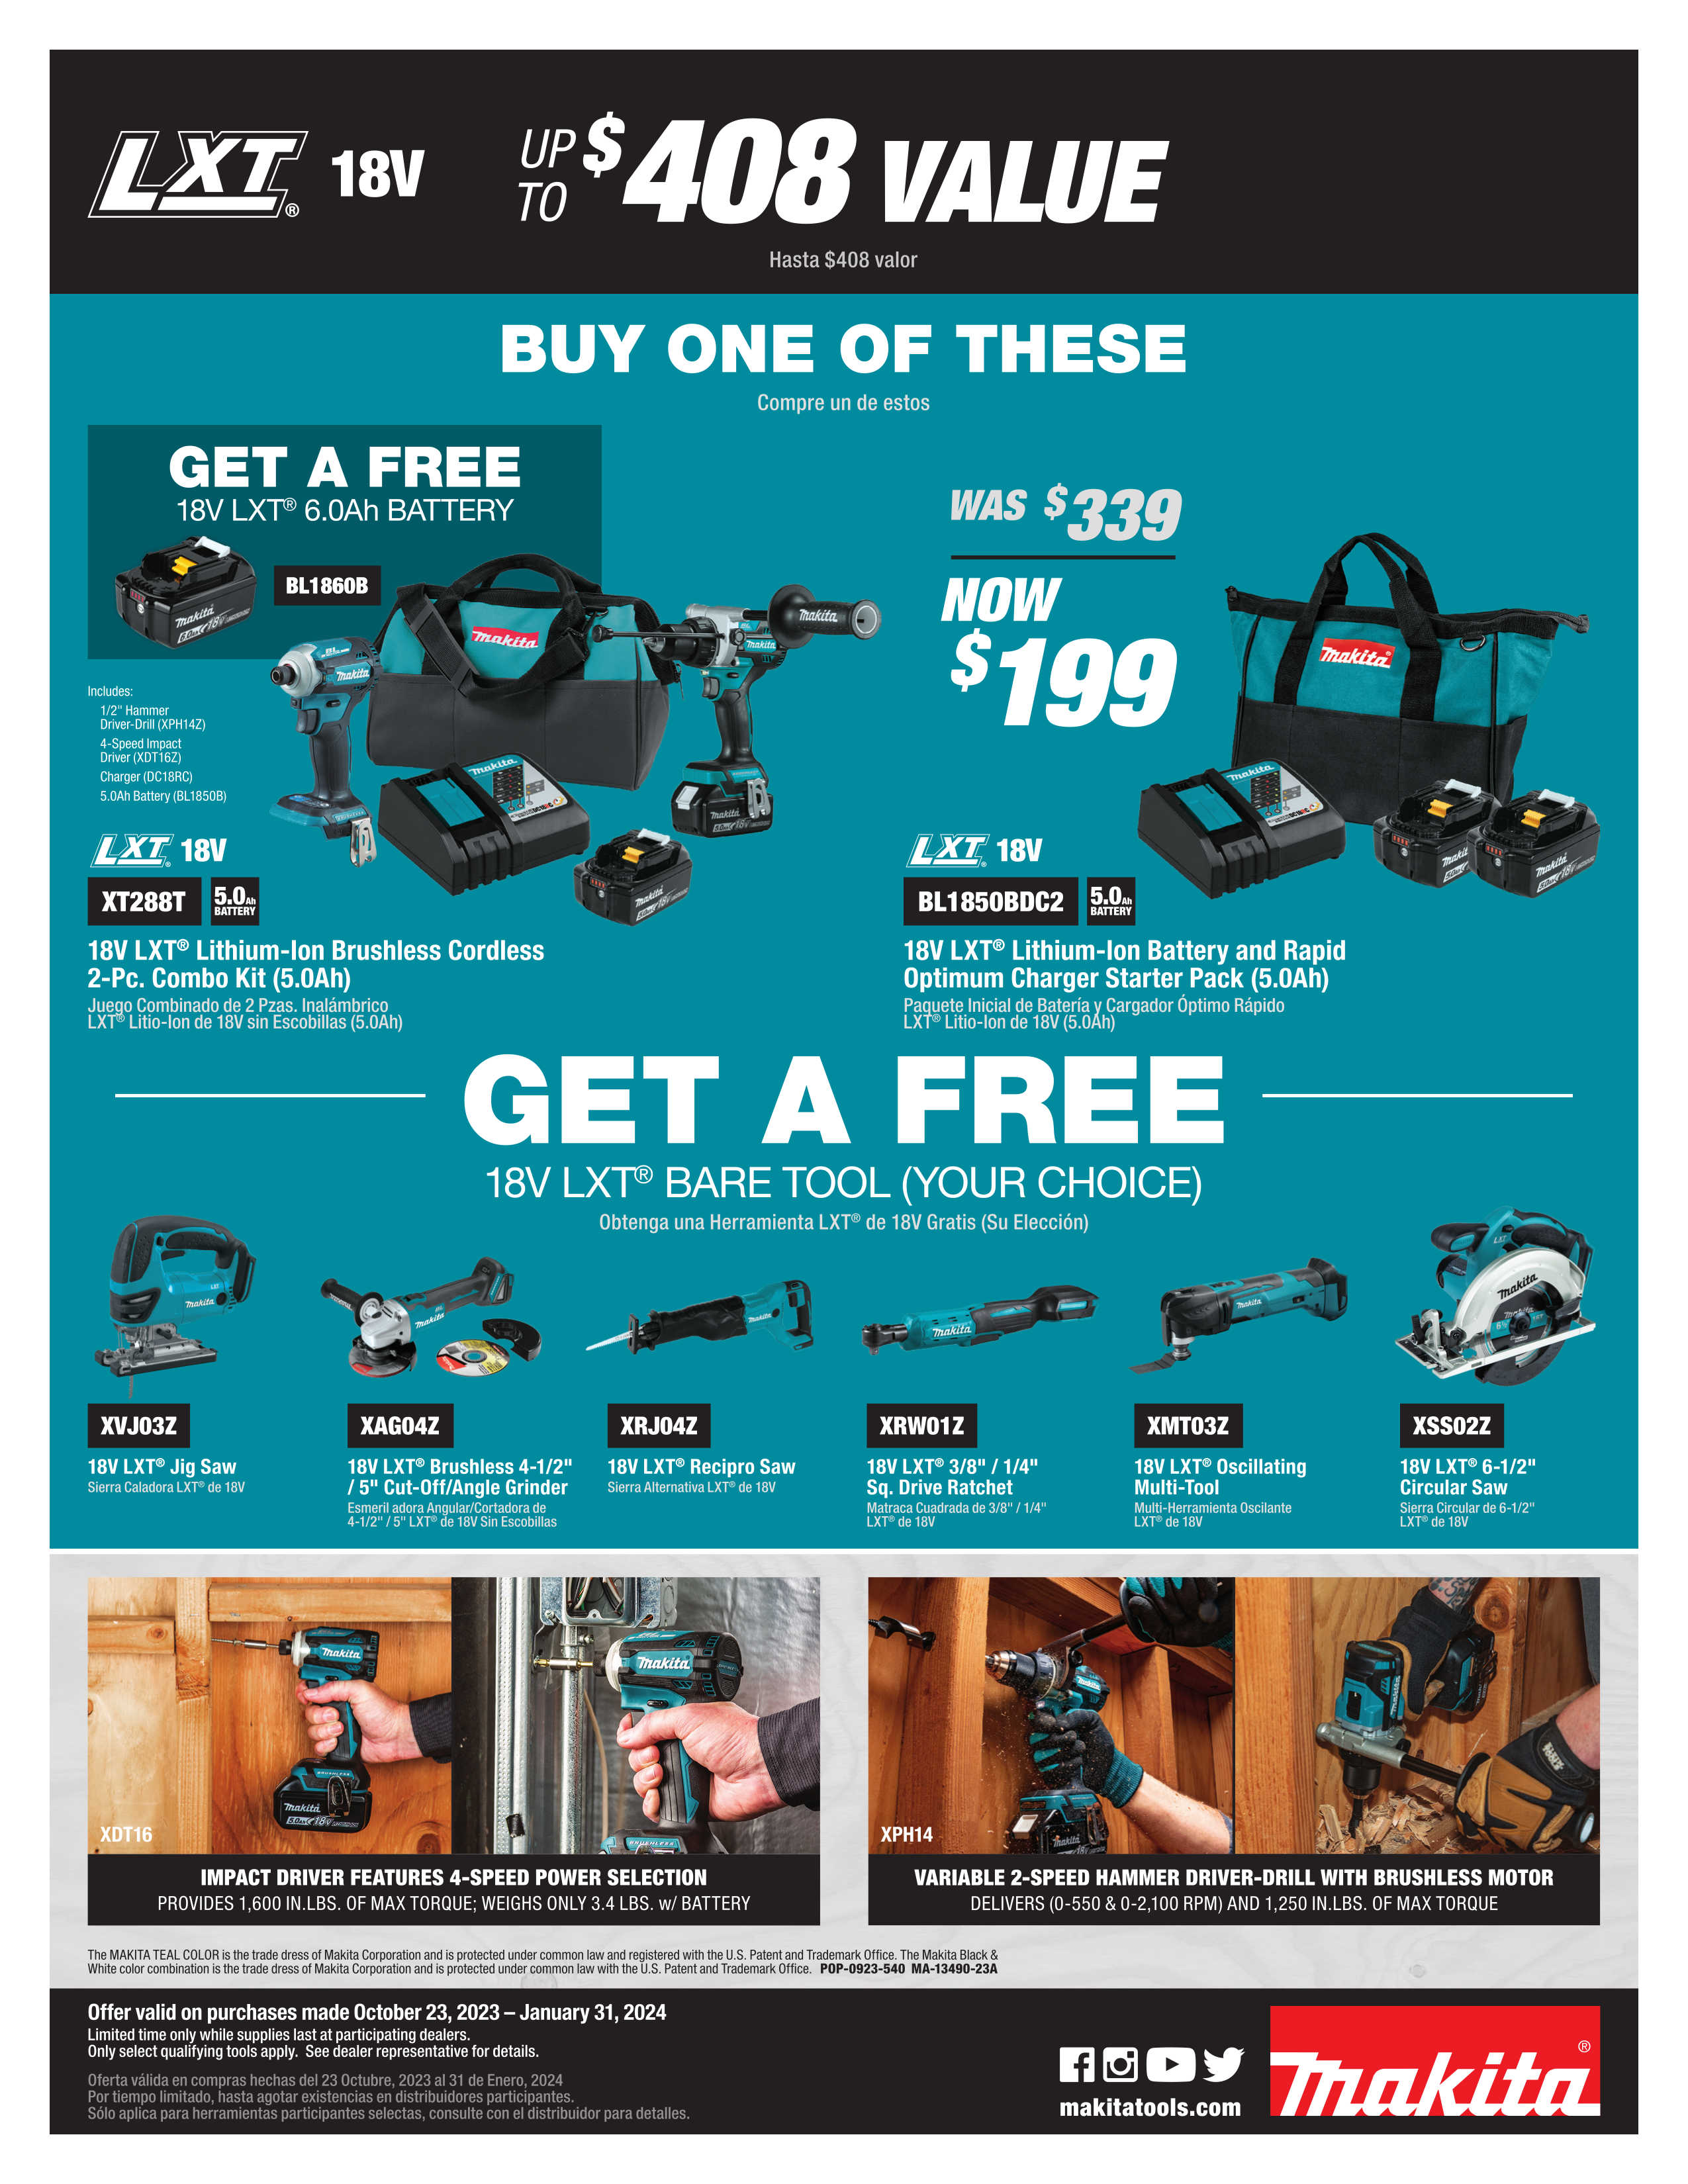 Makita 40V max XGT® Brushless Cordless 4-1/2” / 6 Paddle Switch Angle  Grinder Kit, with Electric Brake (4.0Ah)